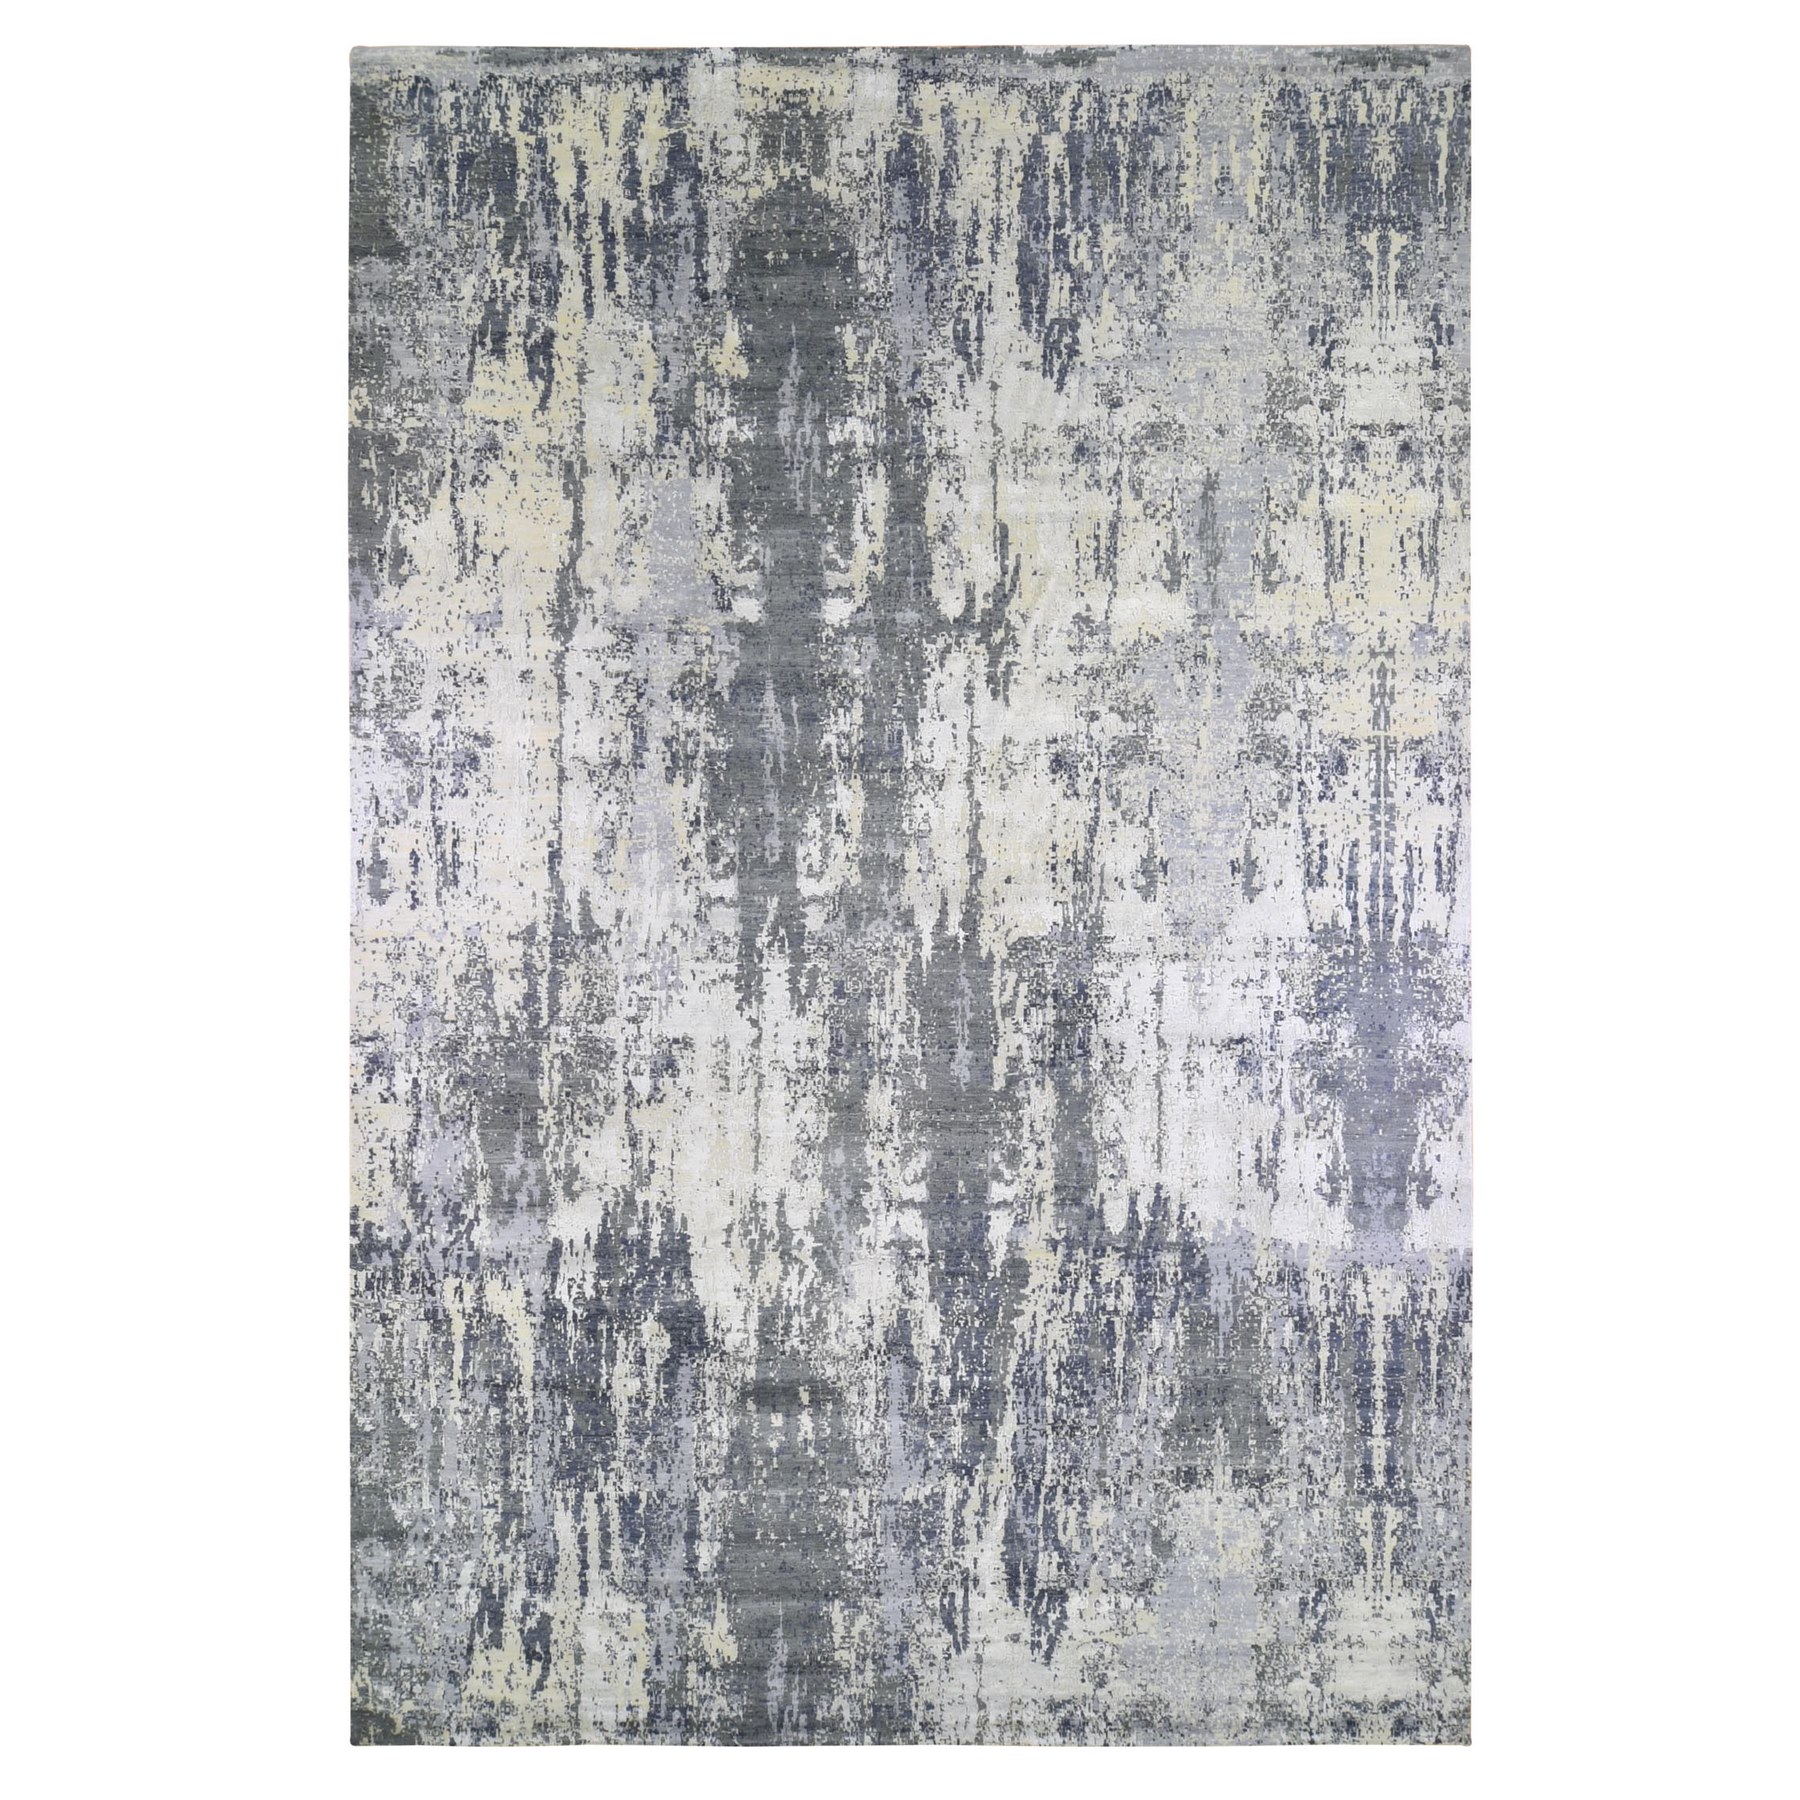 12'x18'1" Oversized Abstract Design with Persian Knot Wool and Silk Denser Weave Charcoal Gray Hand Woven Oriental Rug 